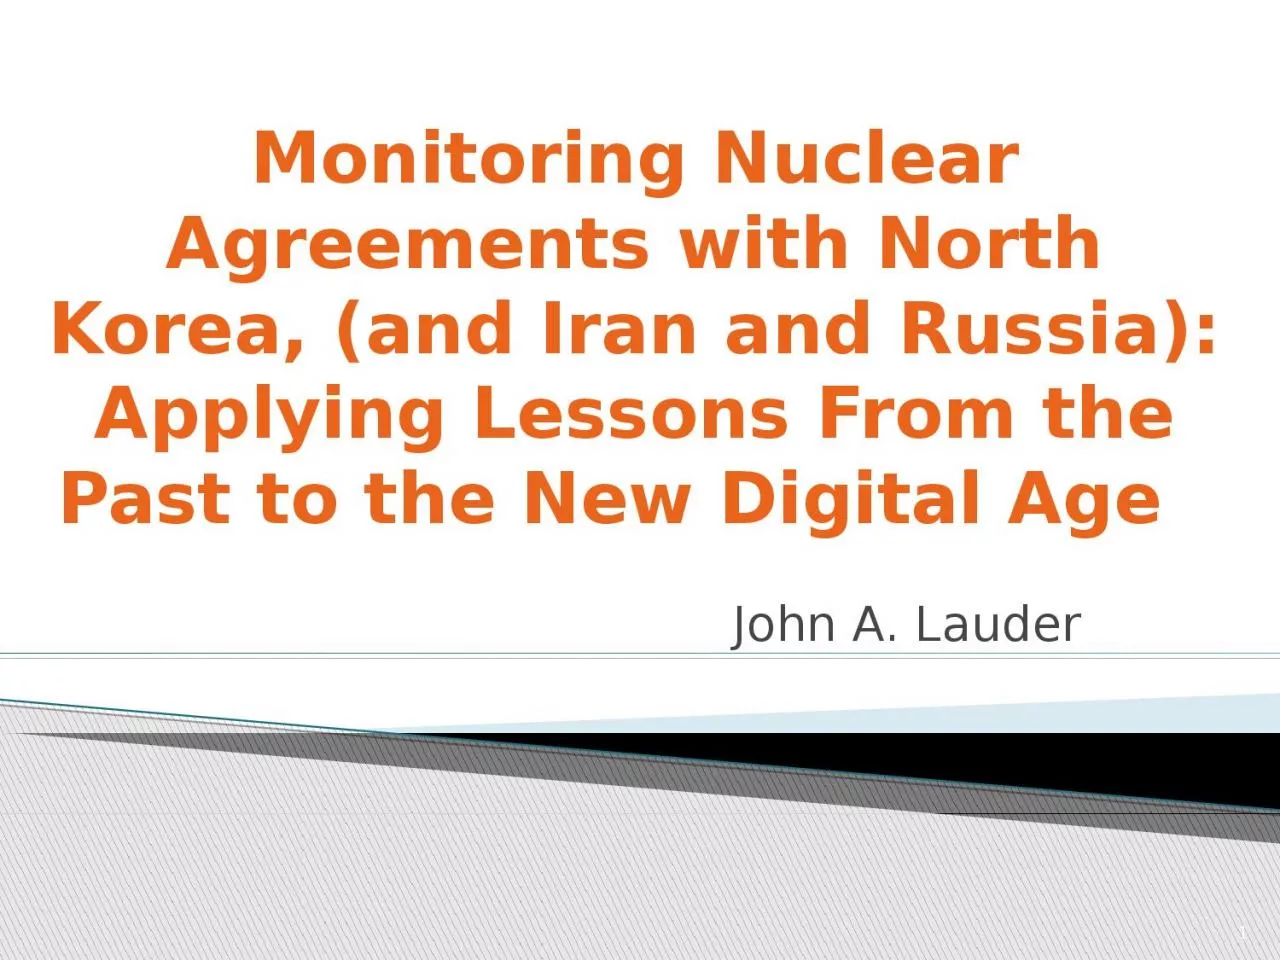 John A. Lauder Monitoring Nuclear Agreements with North Korea, (and Iran and Russia):